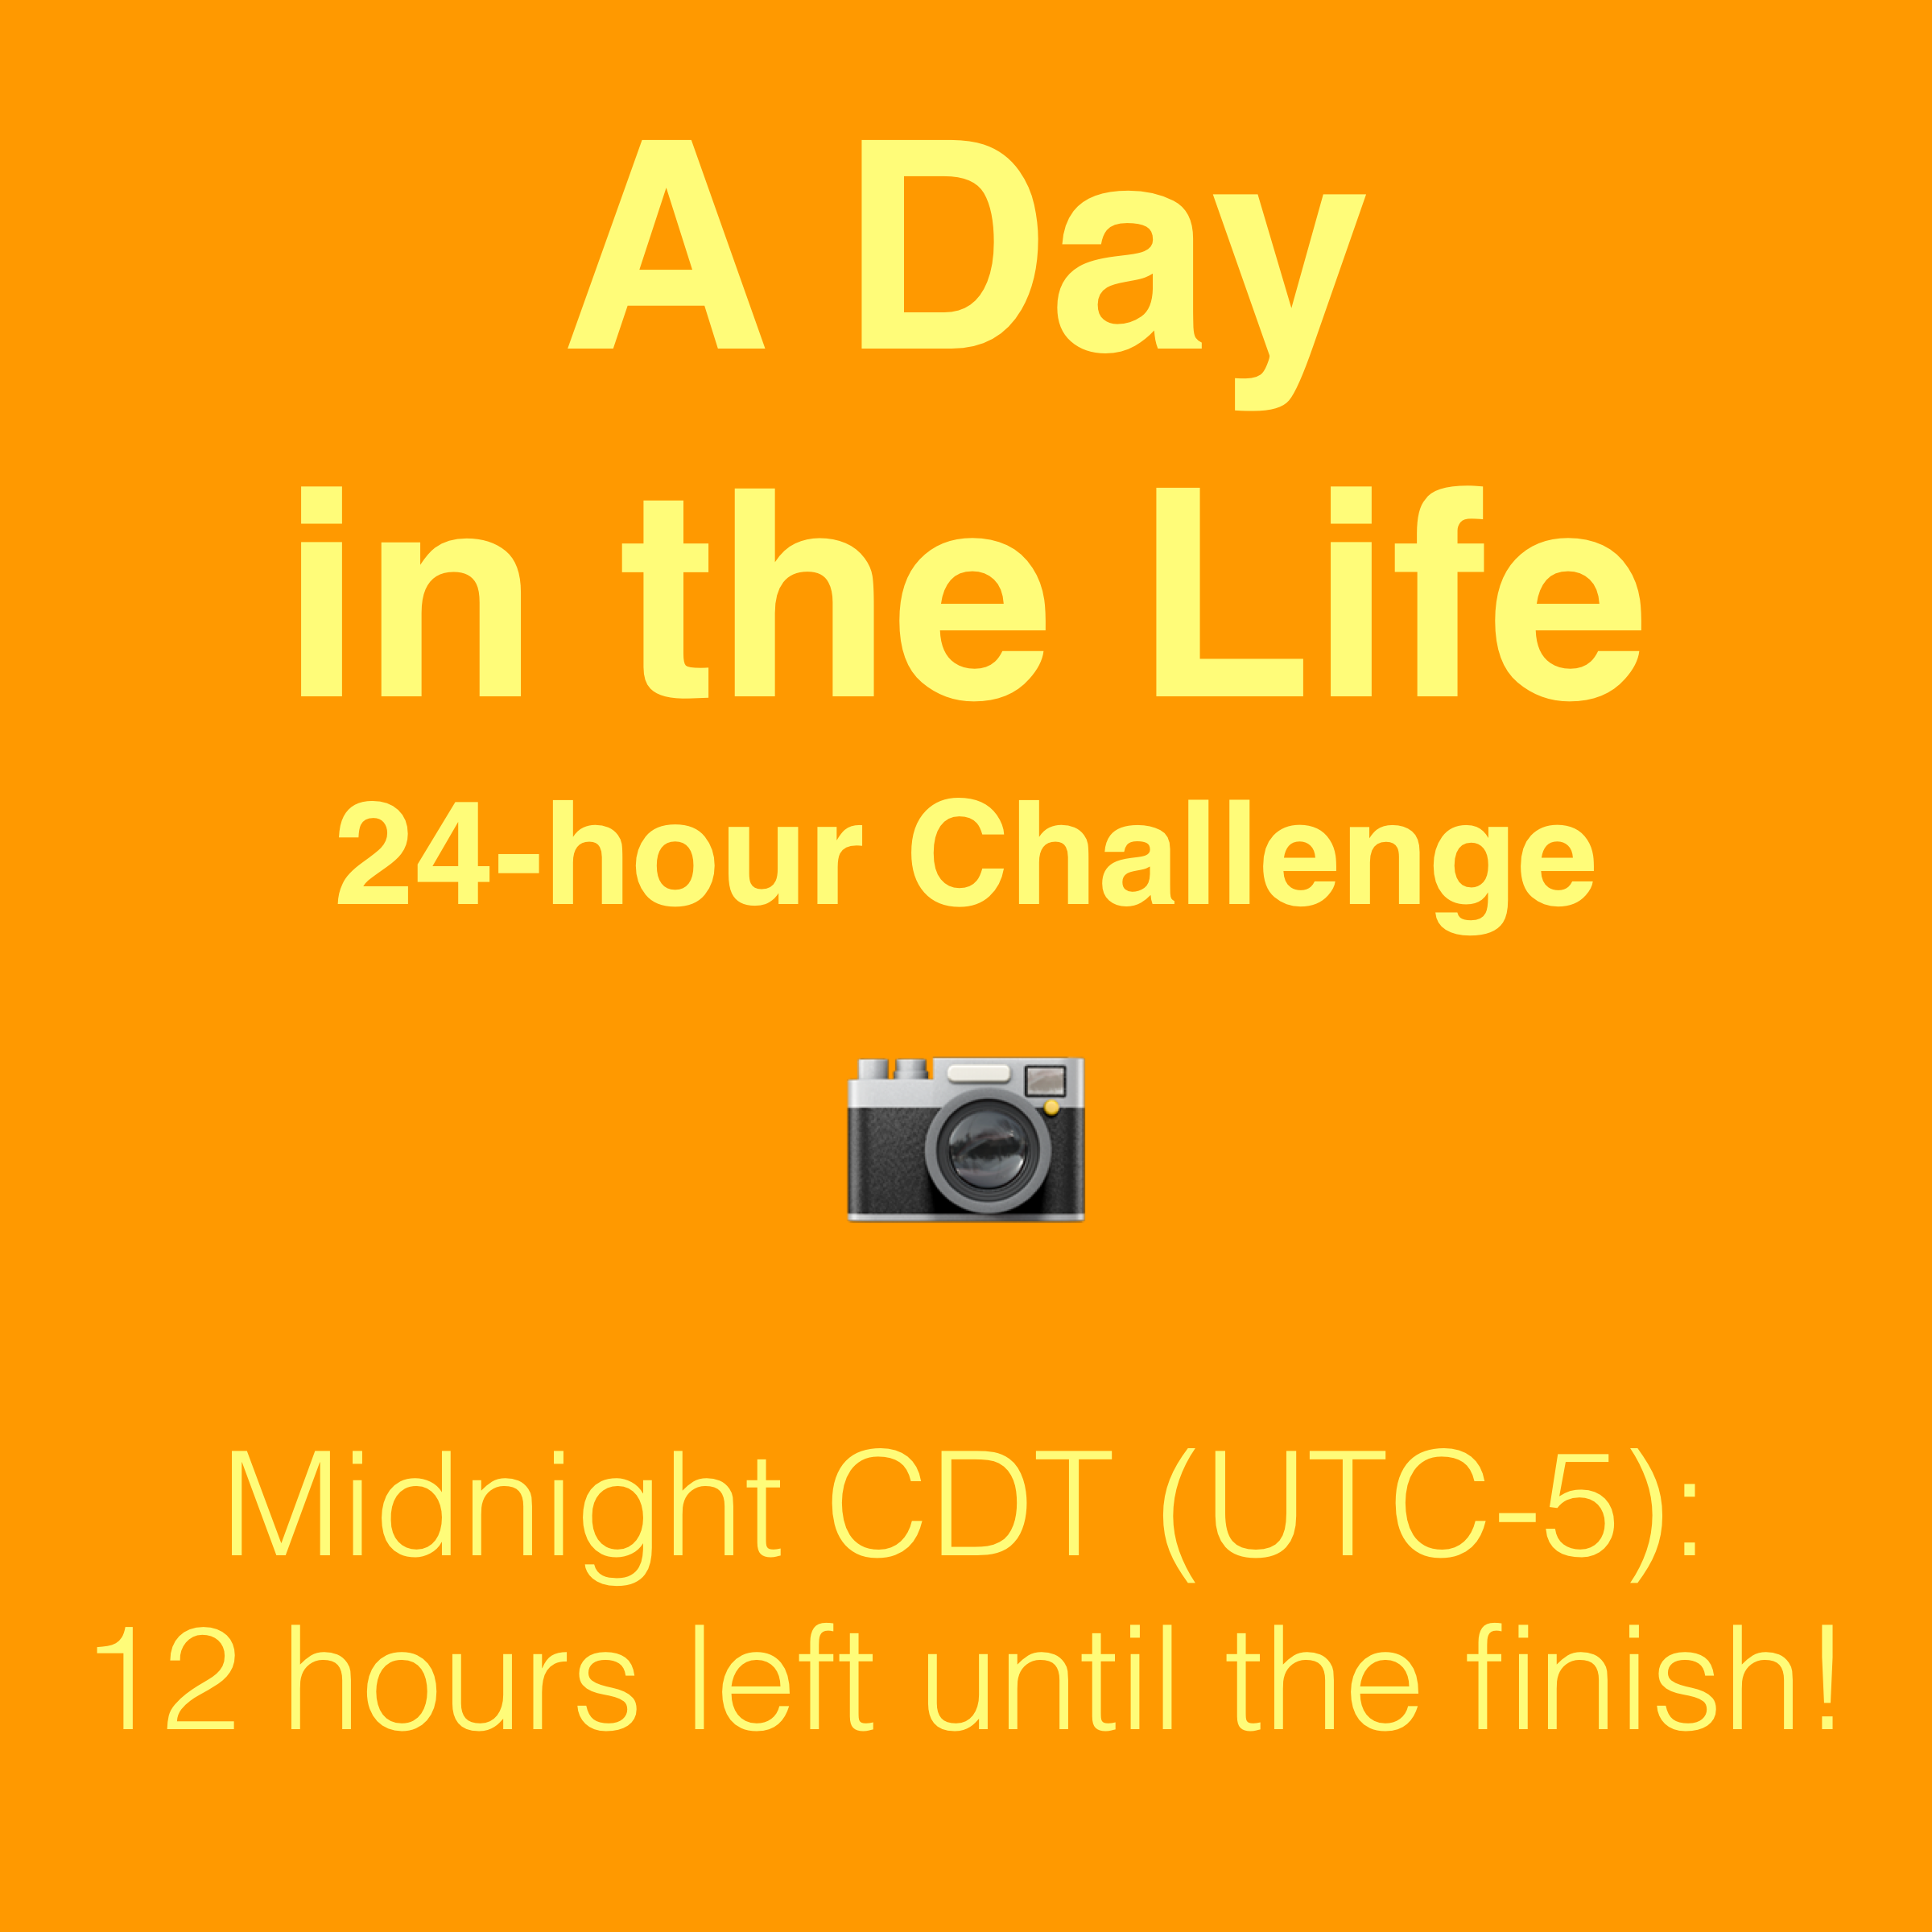 A Day in the Life Challenge halfway point - 12 hours to go!